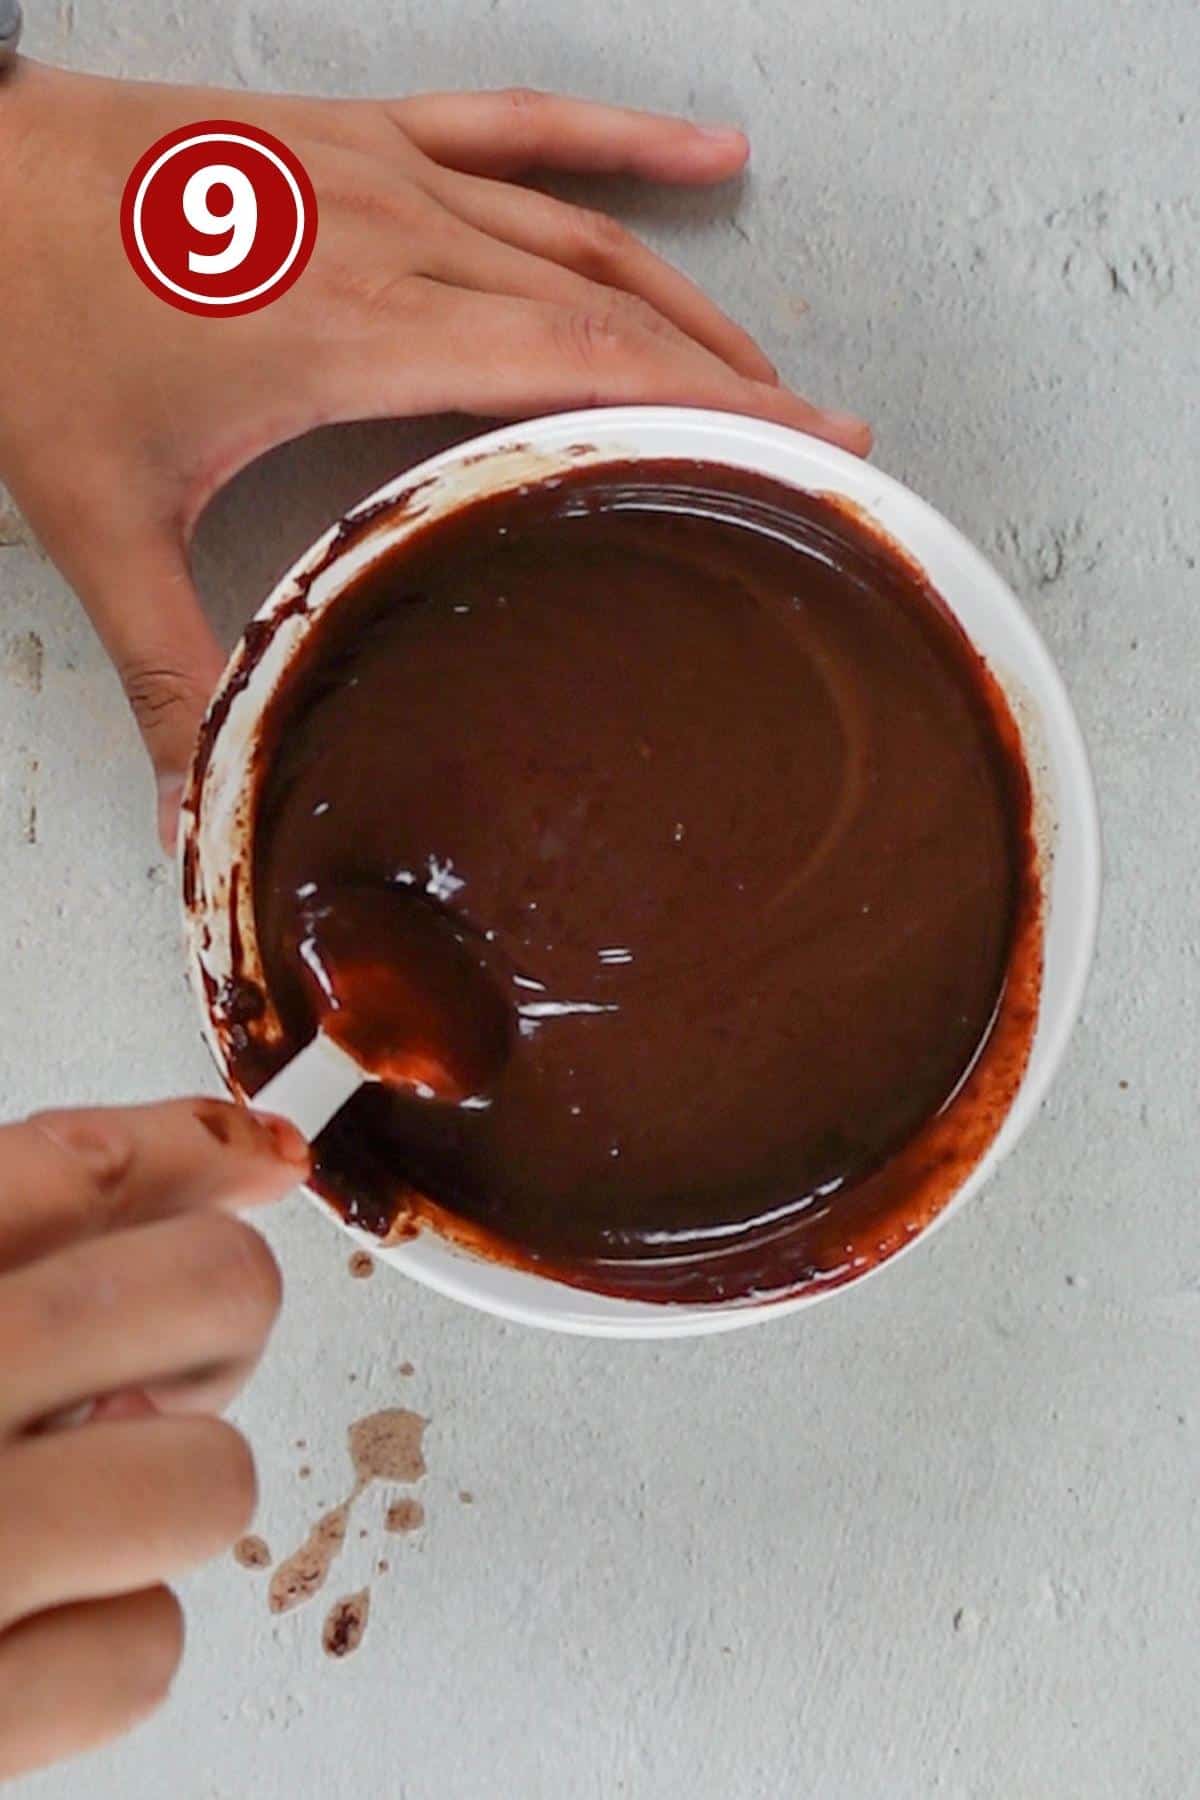 mixing the chocolate chips with heavy cream to make chocolate ganache in a white bowl.